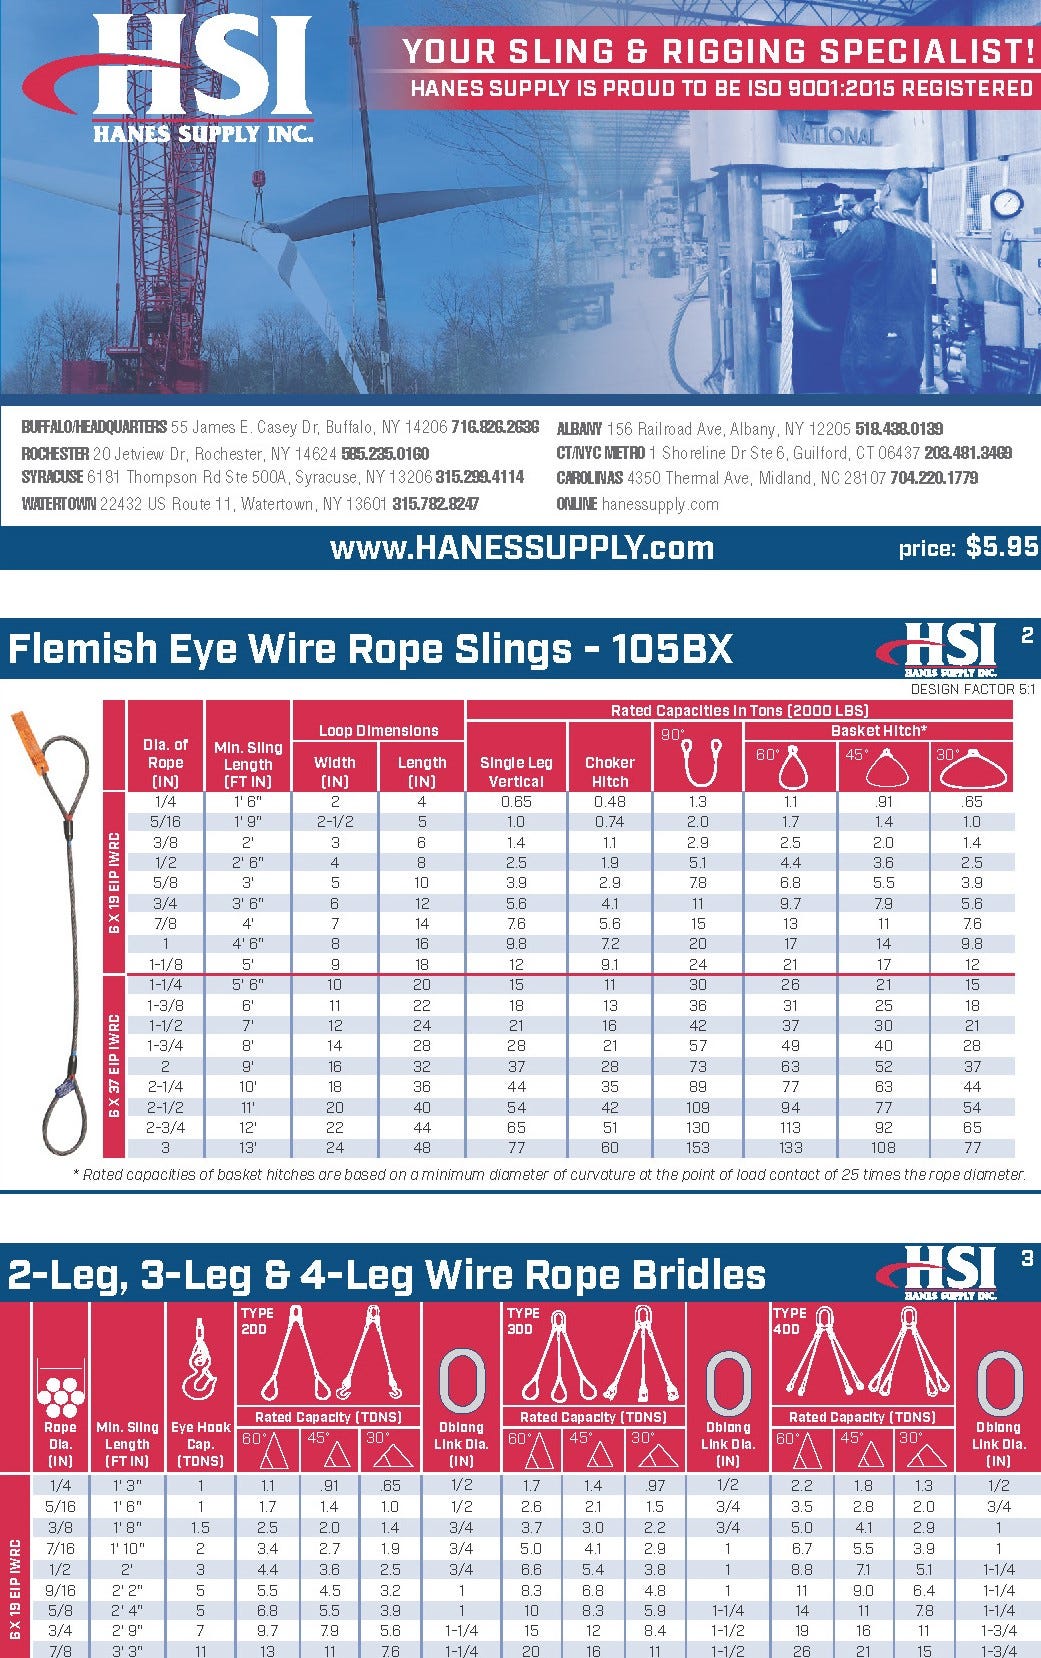 hsi riggers reference card